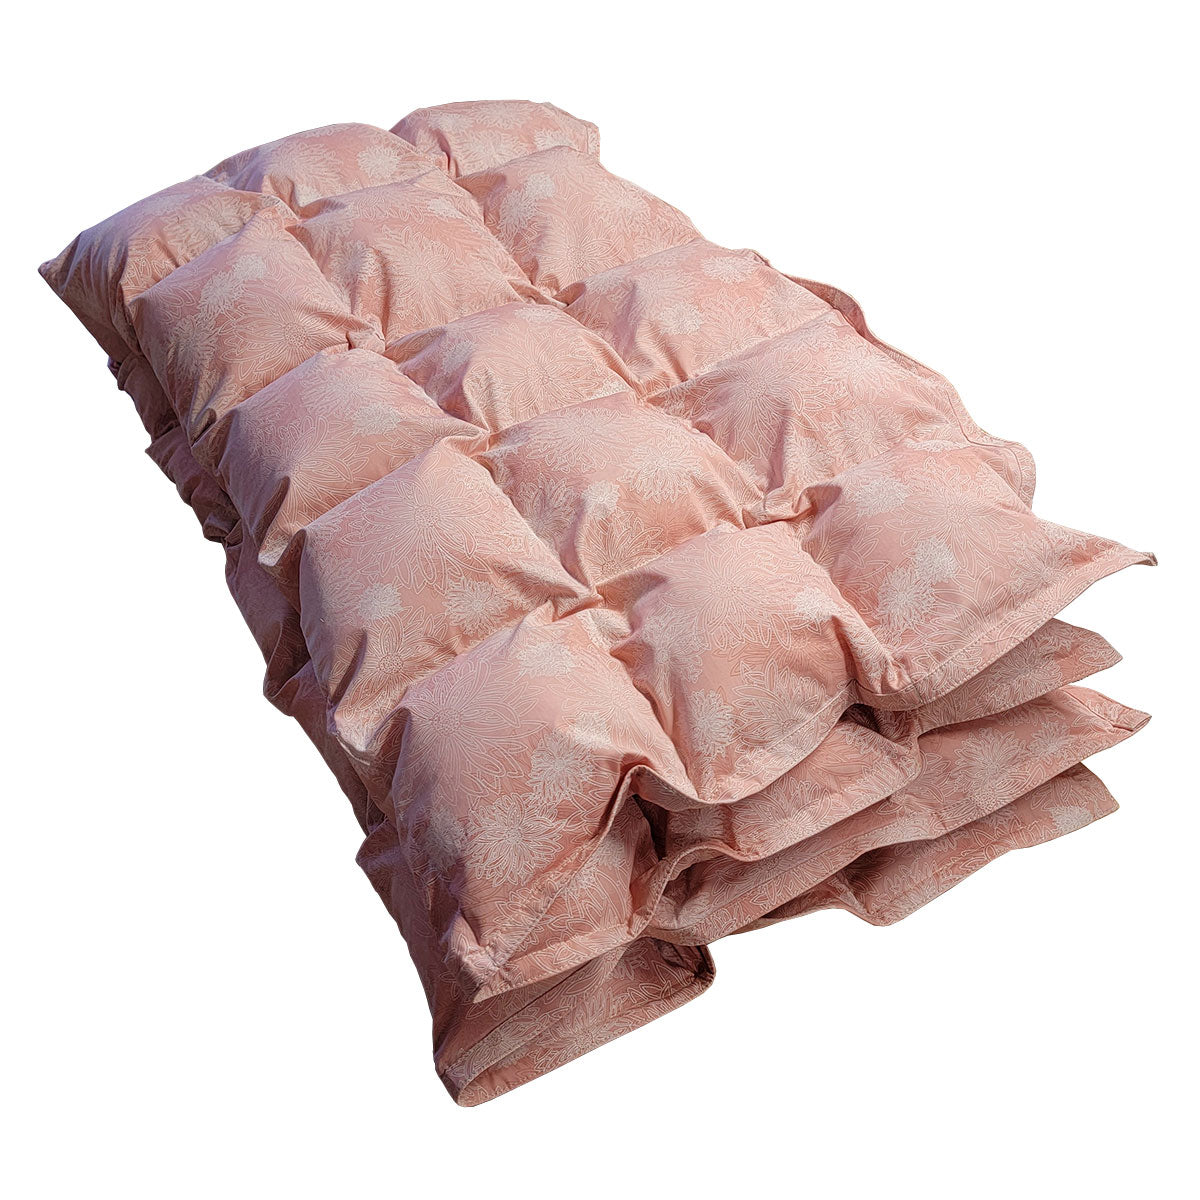 Clearance Weighted Blanket - Medium 8 lb Floral Petal Pink (for 60lb user)